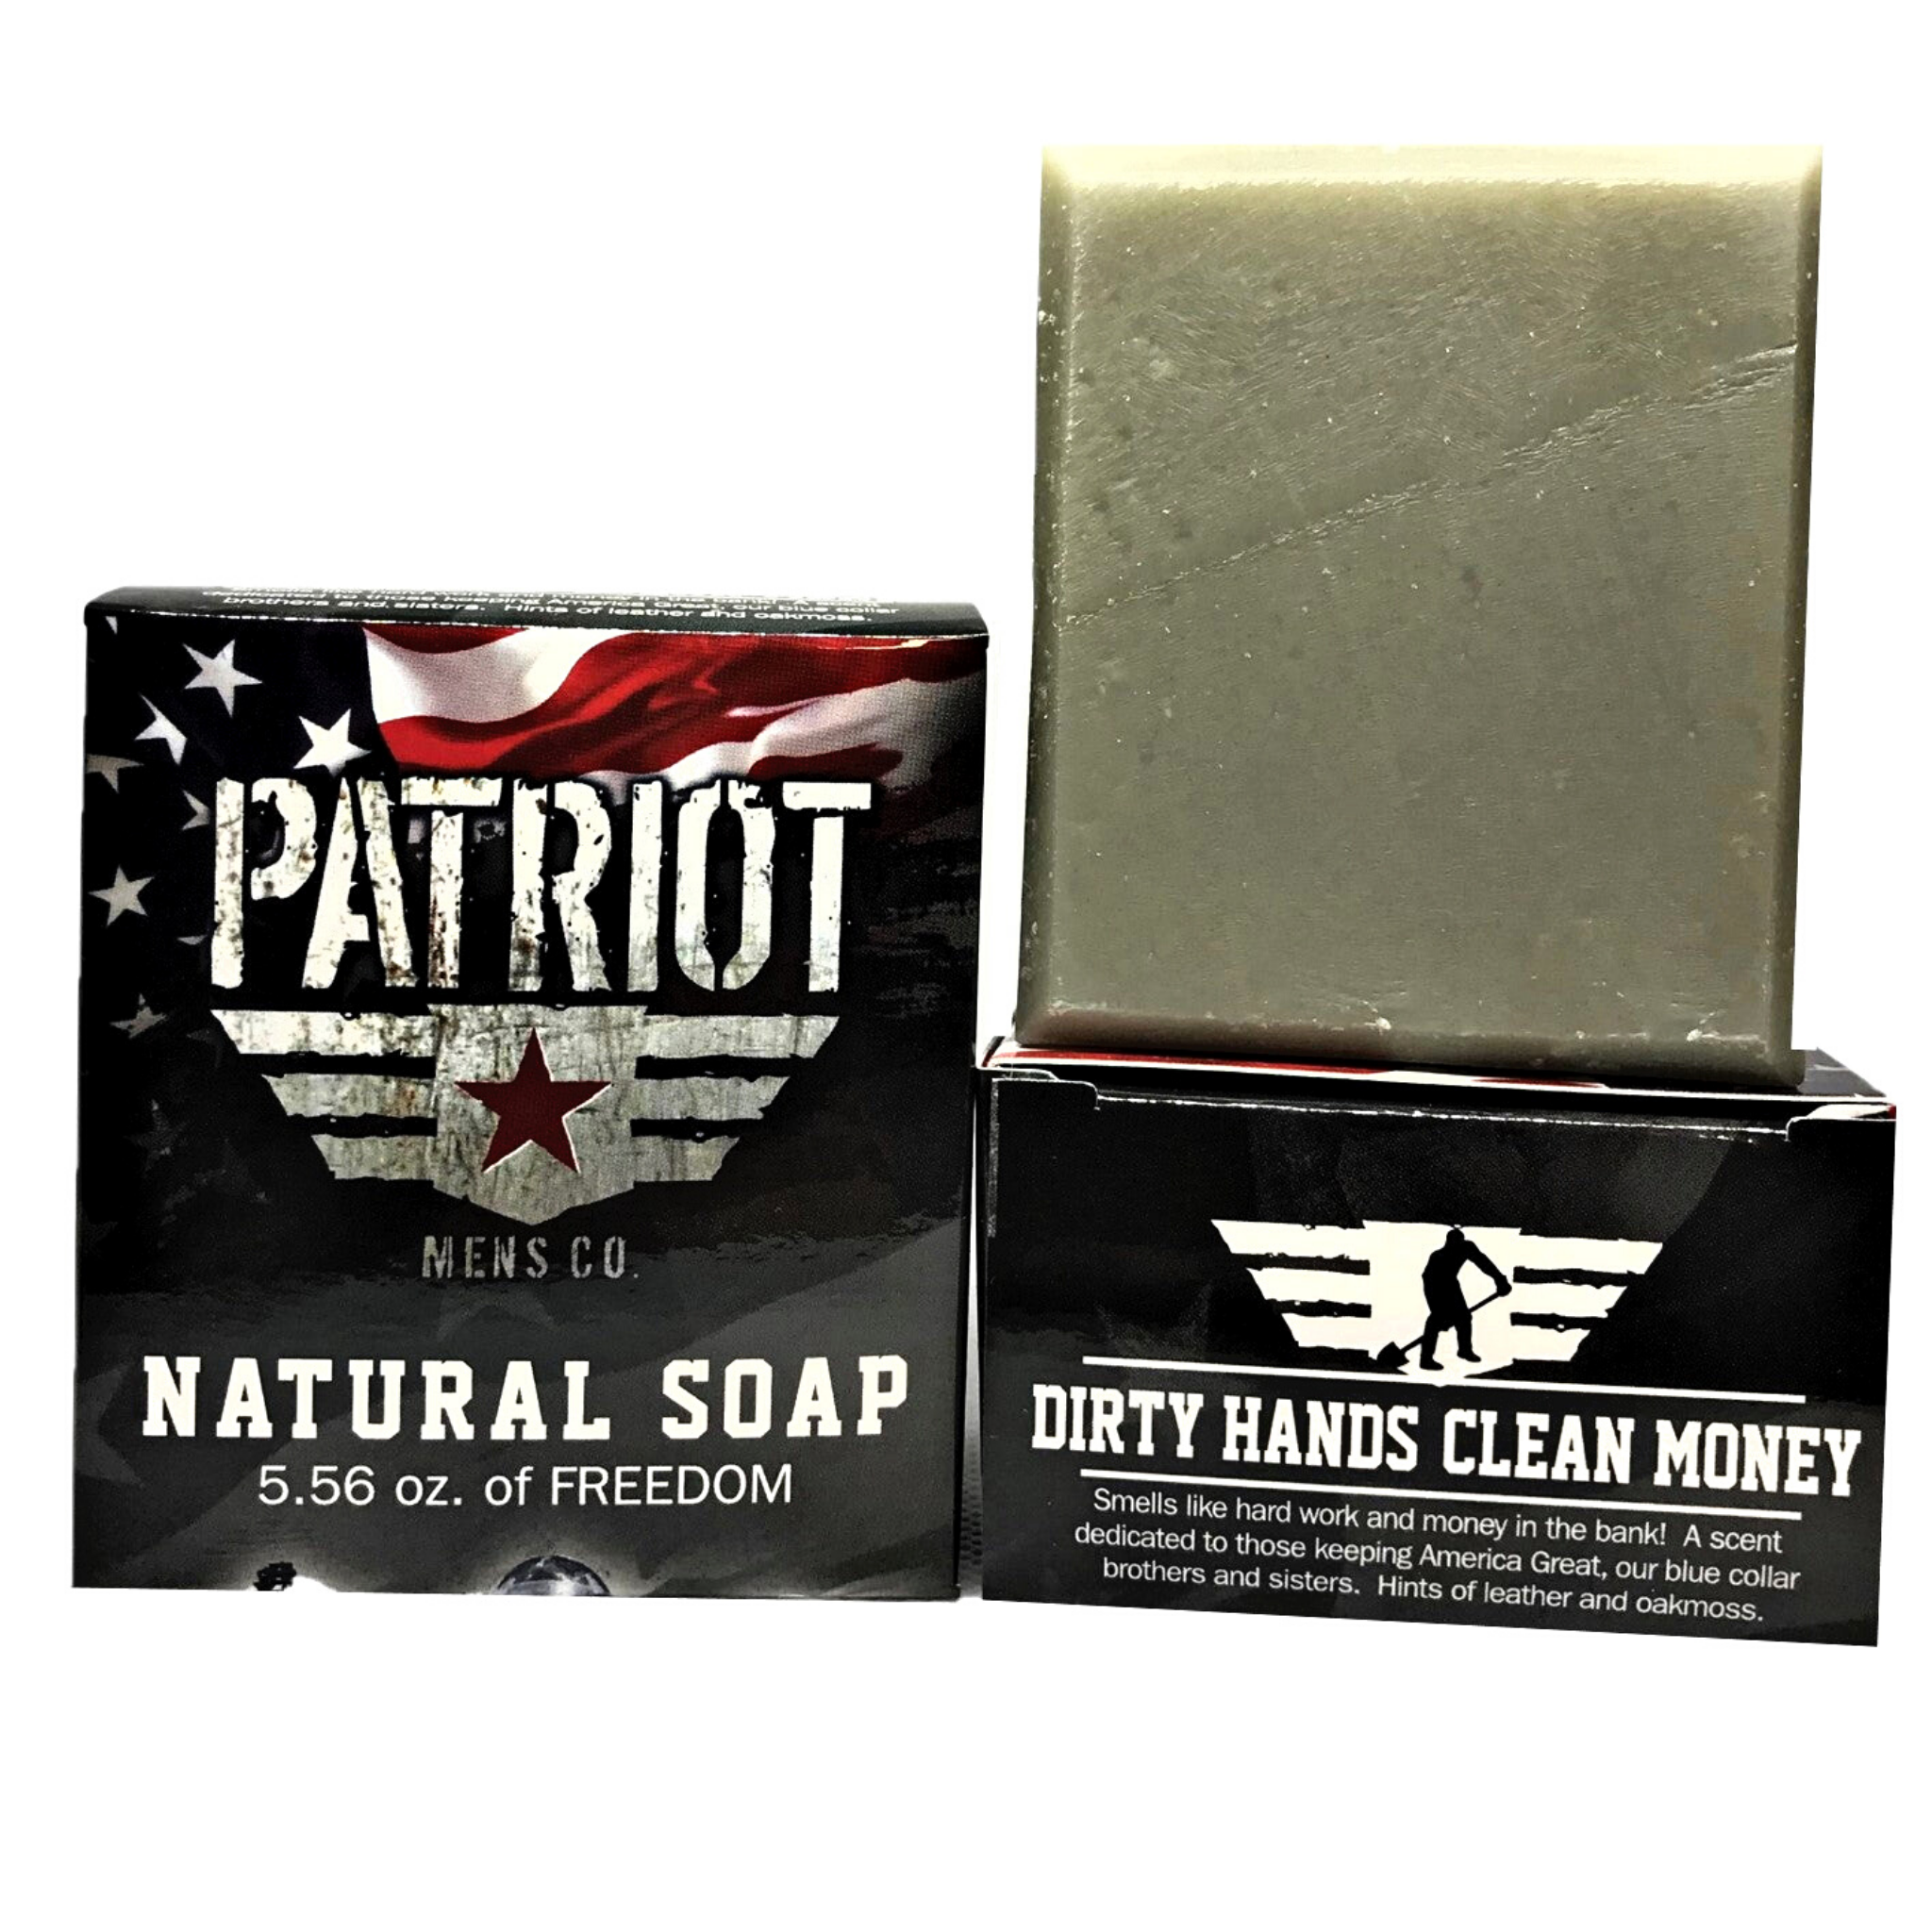 Dirty Hands Clean Money  Leather and Oakmoss - Patriot Mens Company